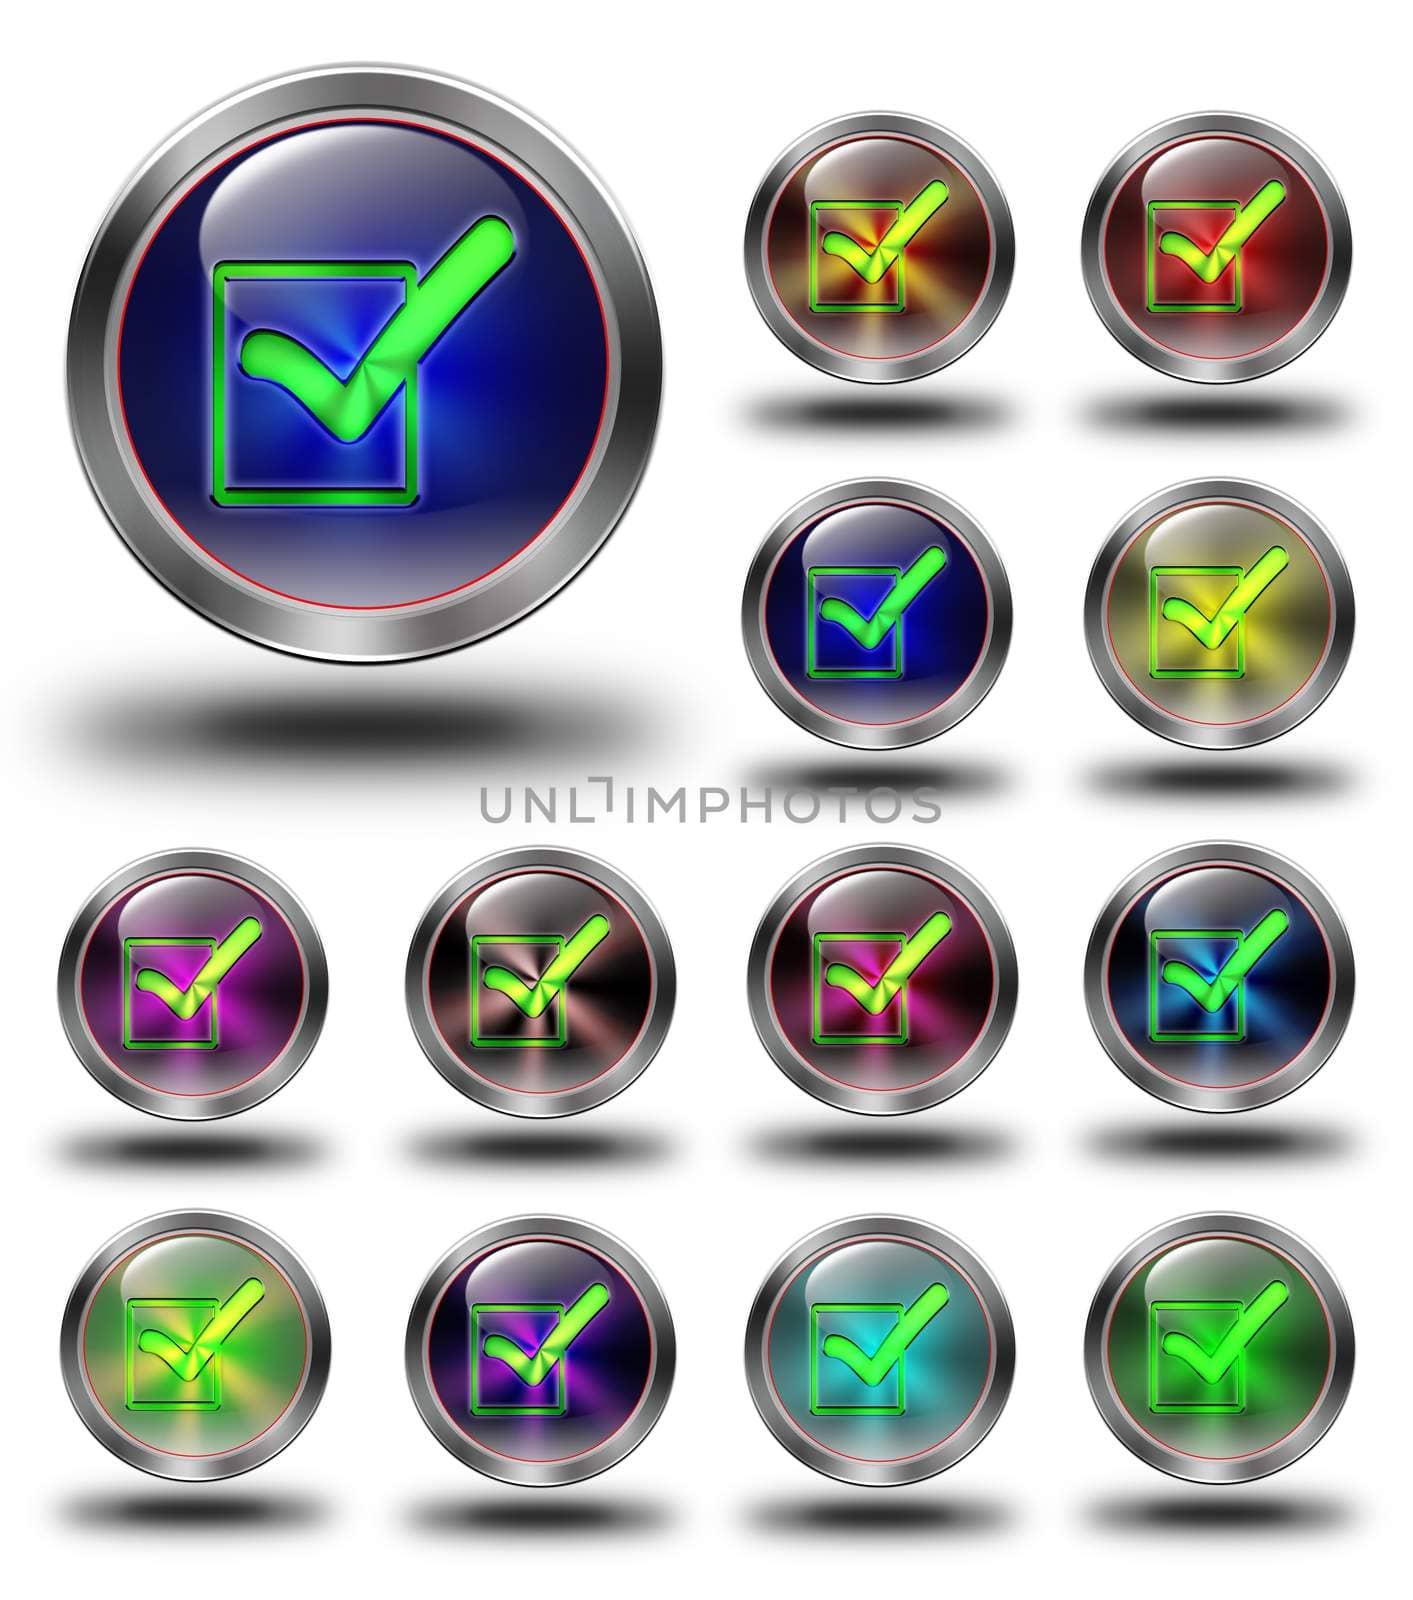 Approved glossy icons, crazy colors #02 by konradkerker